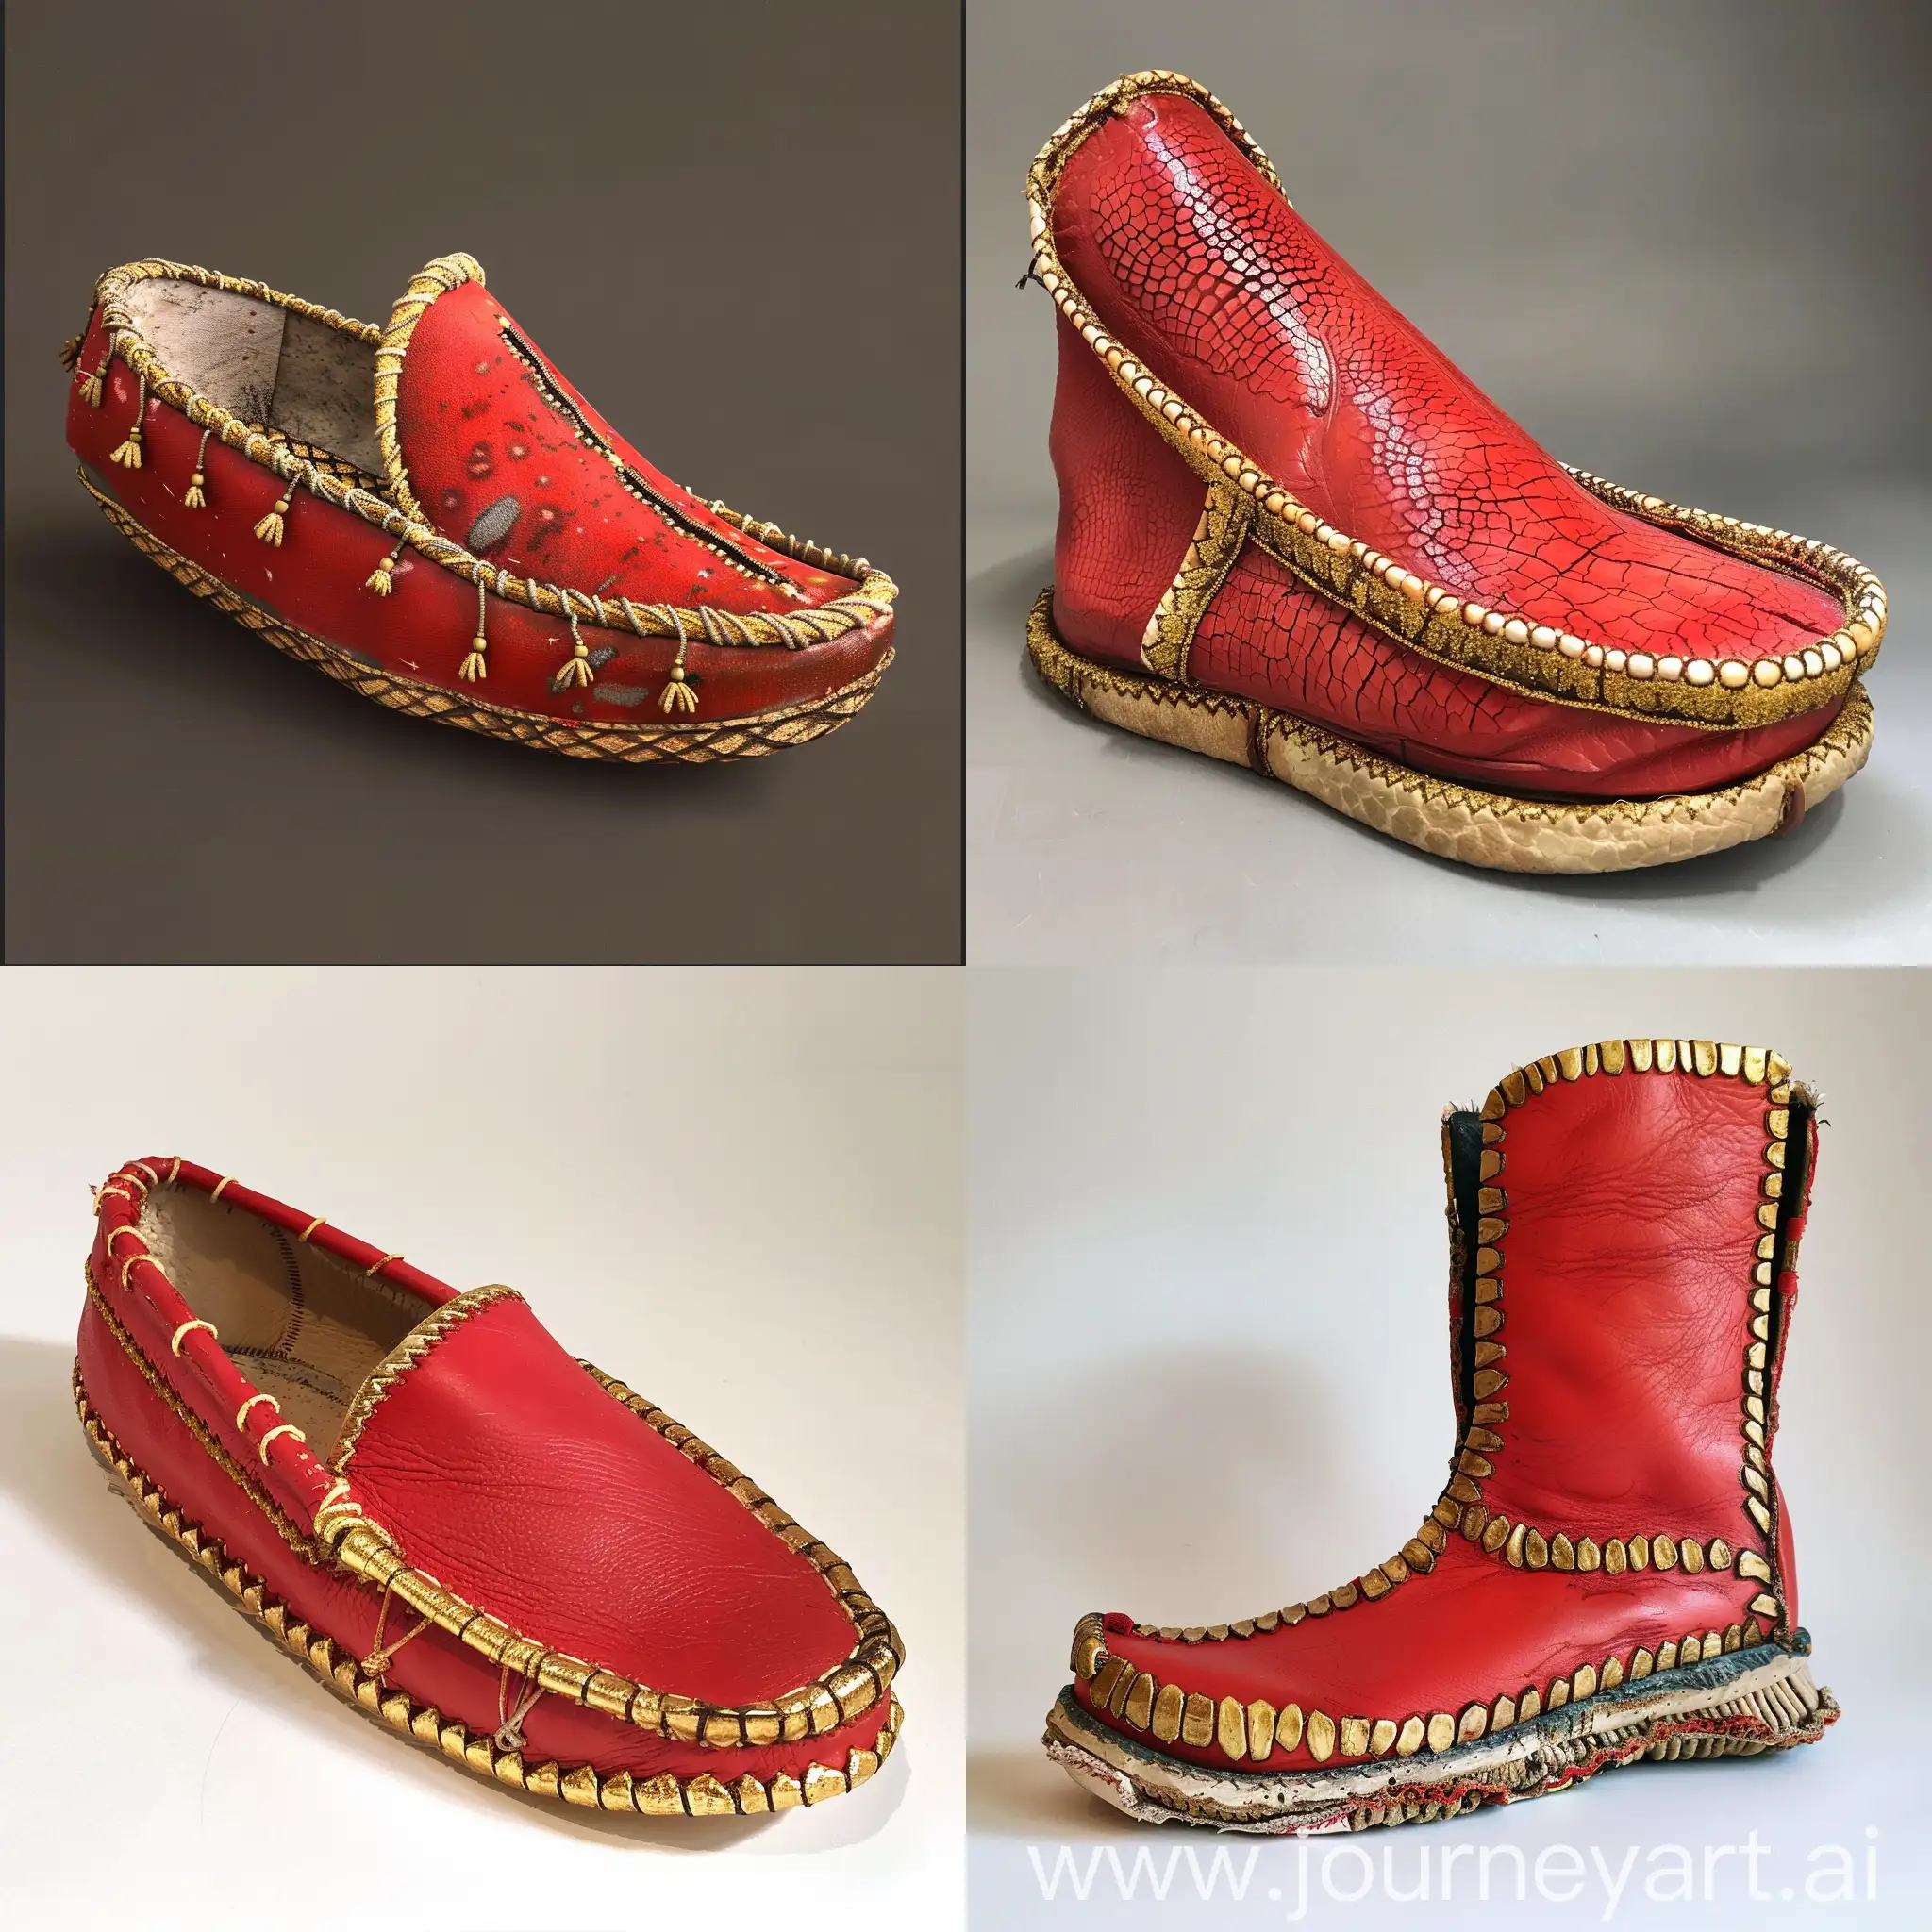 HandPainted-Red-Moccasin-with-Golden-Trim